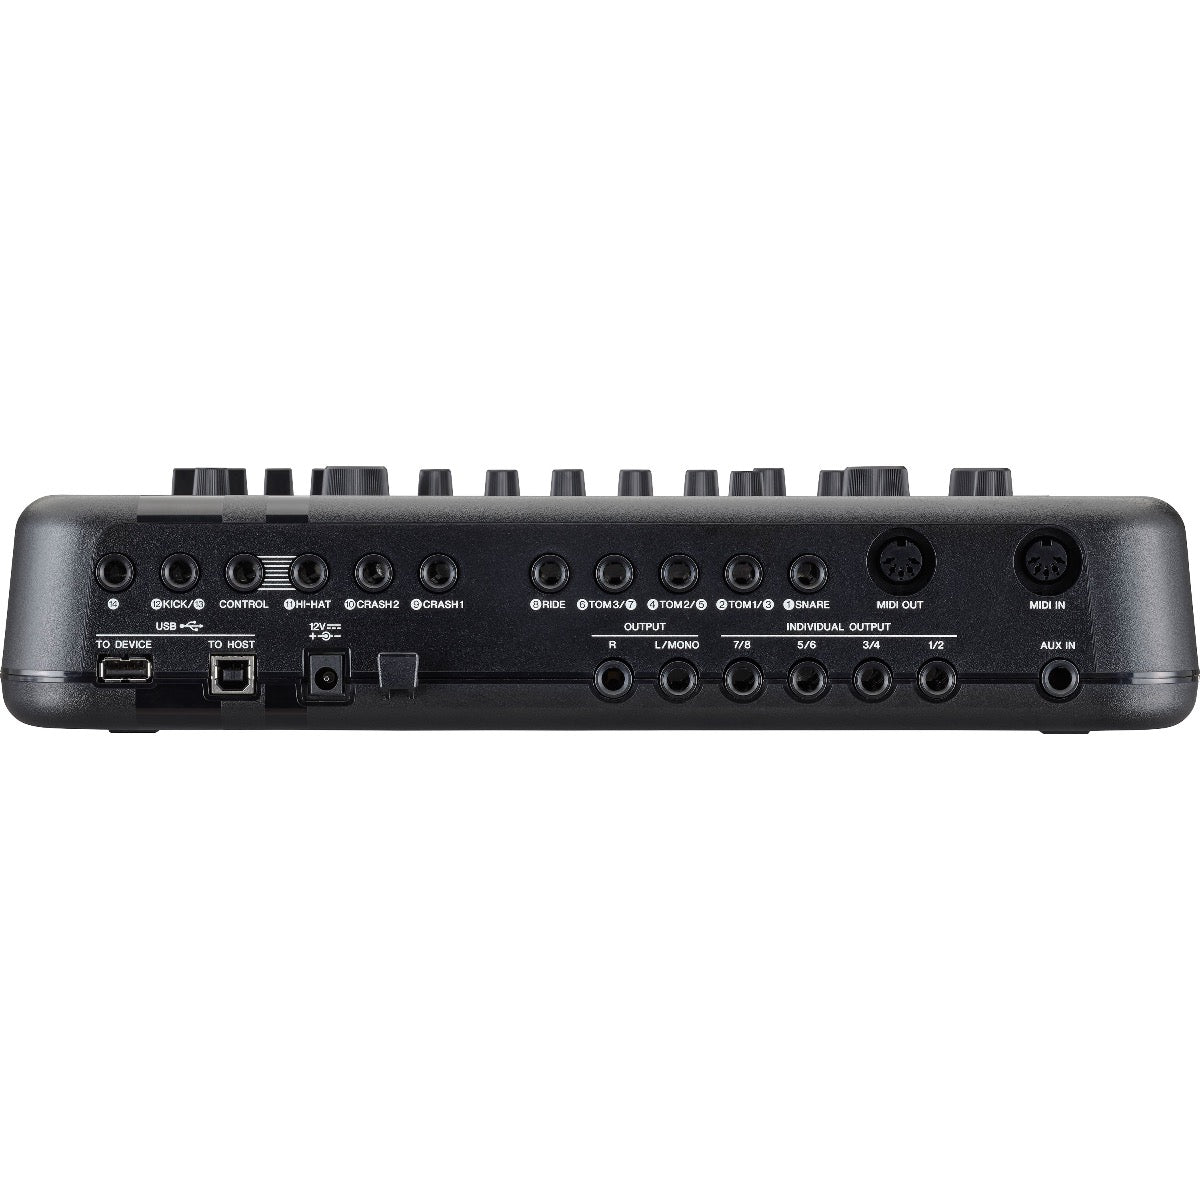 Rear view of Yamaha DTX-PROX Drum Trigger Module